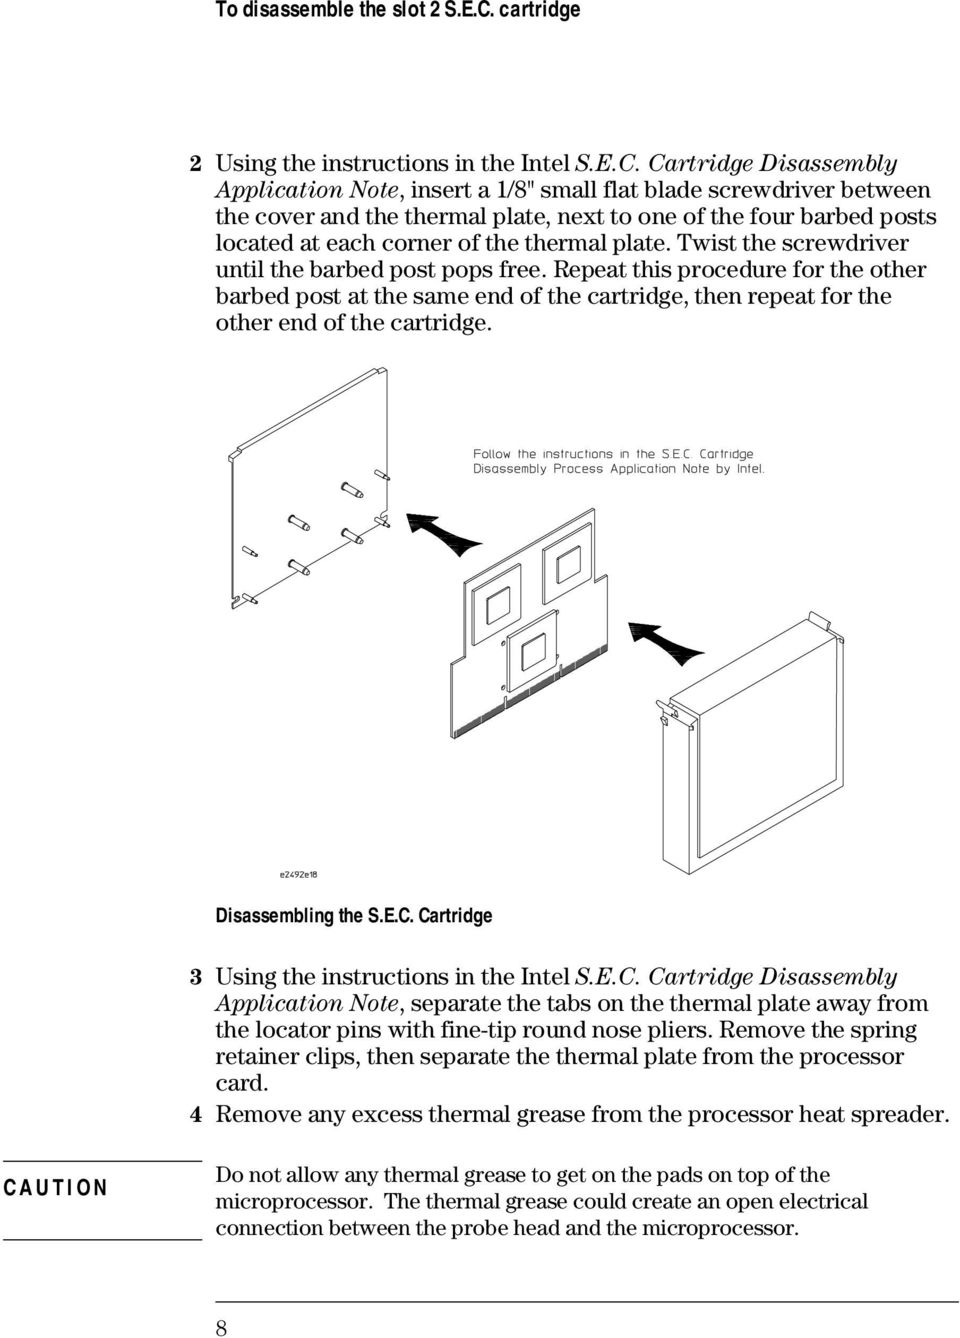 Cartridge Disassembly Application Note, insert a 1/8" small flat blade screwdriver between the cover and the thermal plate, next to one of the four barbed posts located at each corner of the thermal